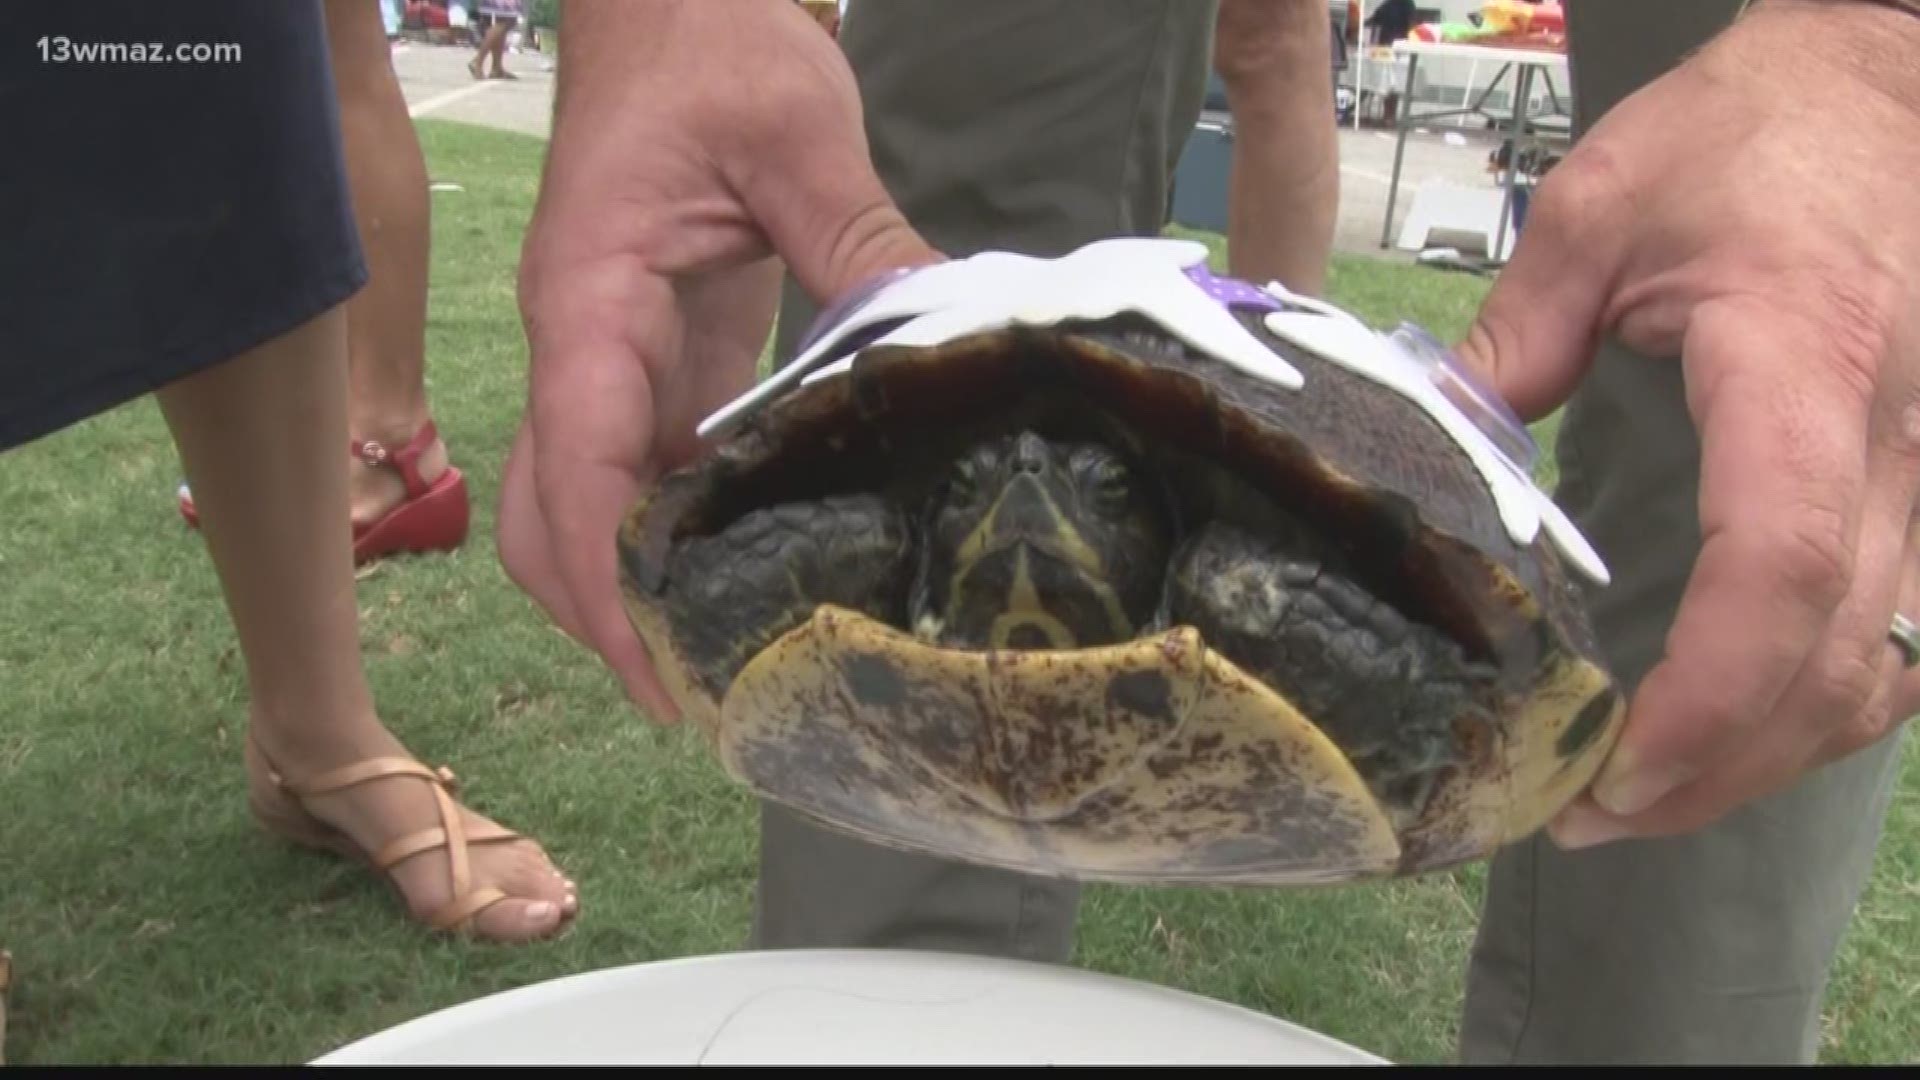 Turtles took off Saturday in the 43rd Annual Wrightsville Turtle Race in Johnson County. It was held in a memory of a long-time racer, Caleb Pool, who lost his battle with cancer.